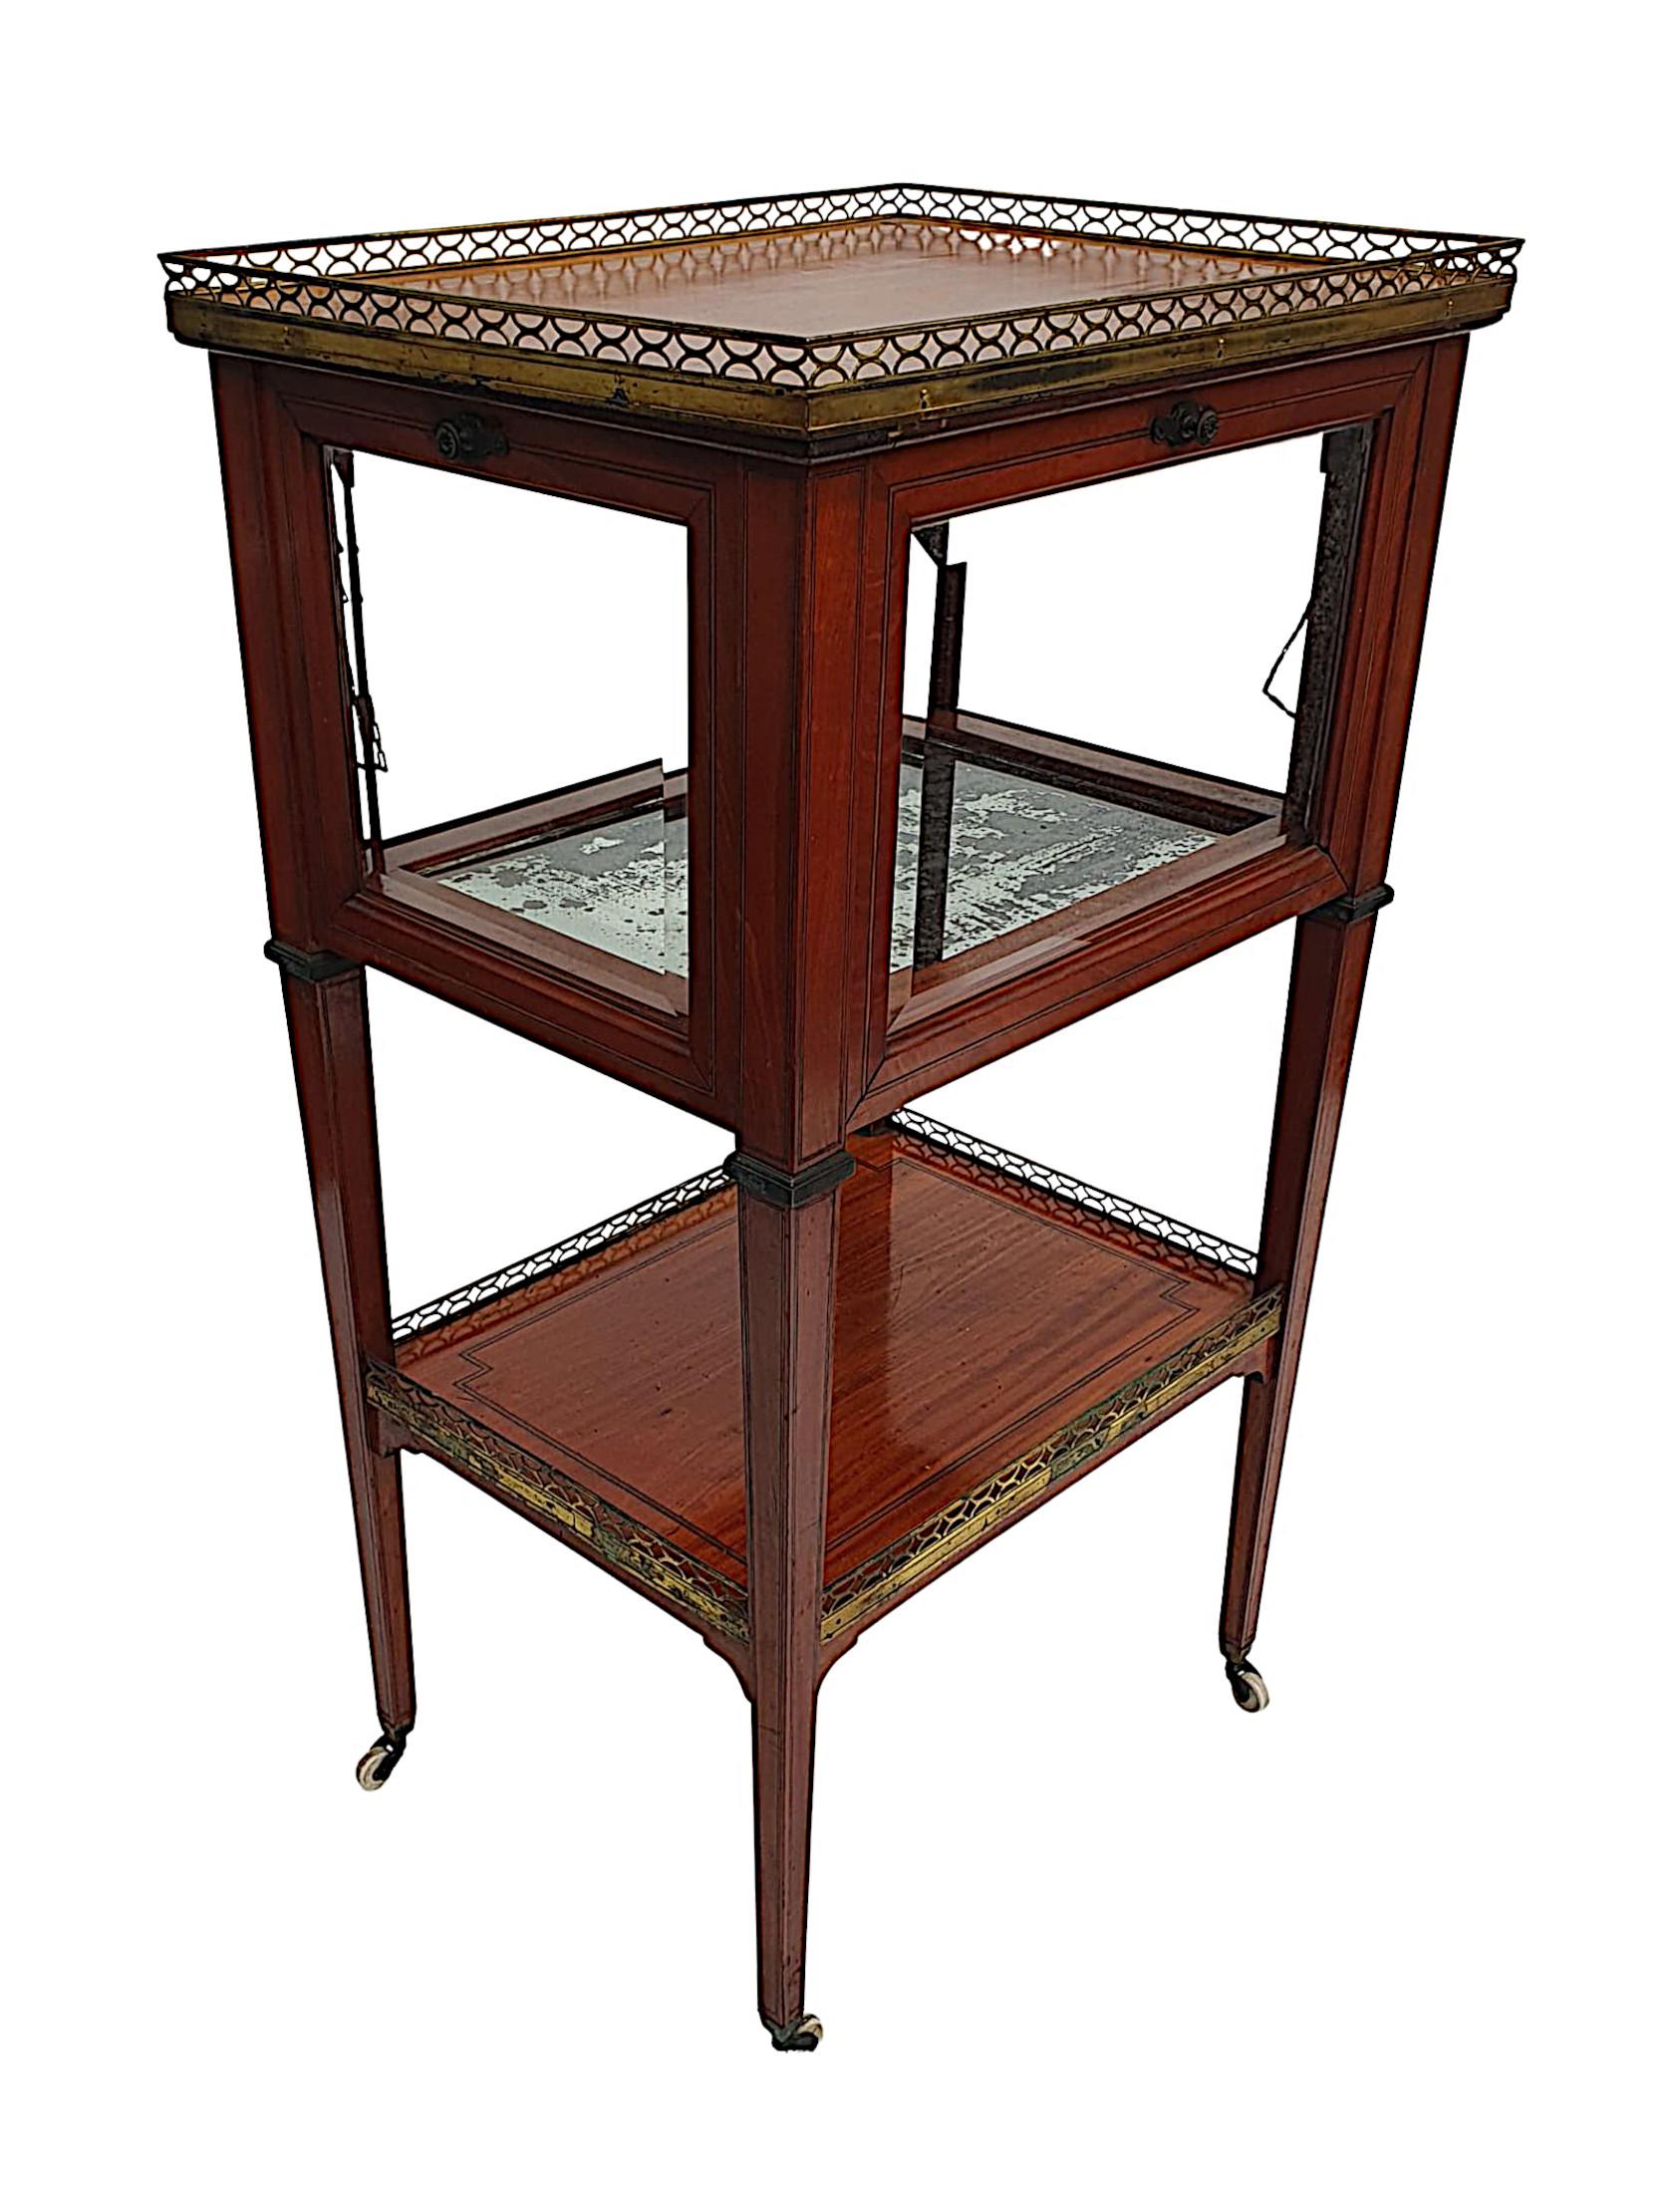 A stunning Edwardian satinwood drinks table with fine line inlay throughout. The moulded top of rectangular form with pierced brass gallery rail raised over four bevelled glass panels which extend downwards, supported on tapering square legs with